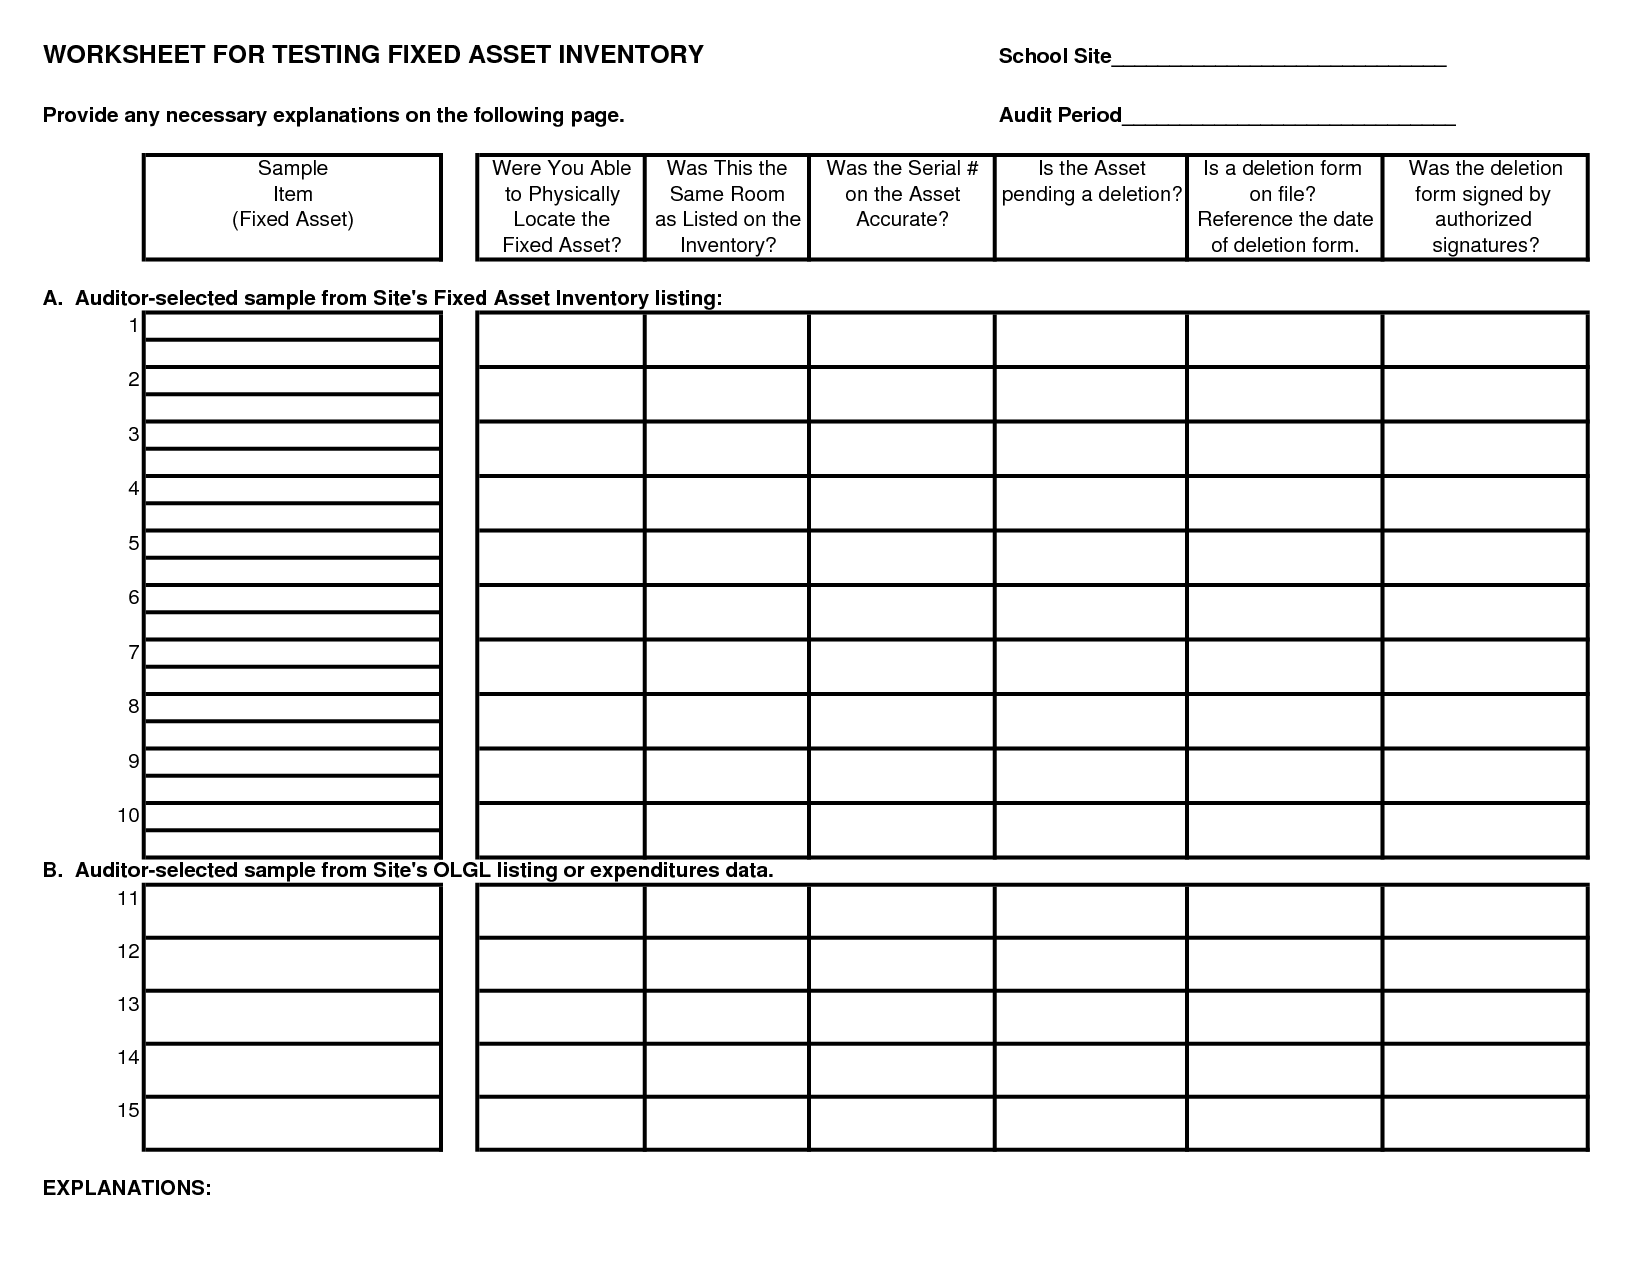 12 Best Images of Celebrate Recovery Inventory Worksheet  Spiritual Inventory Worksheet 